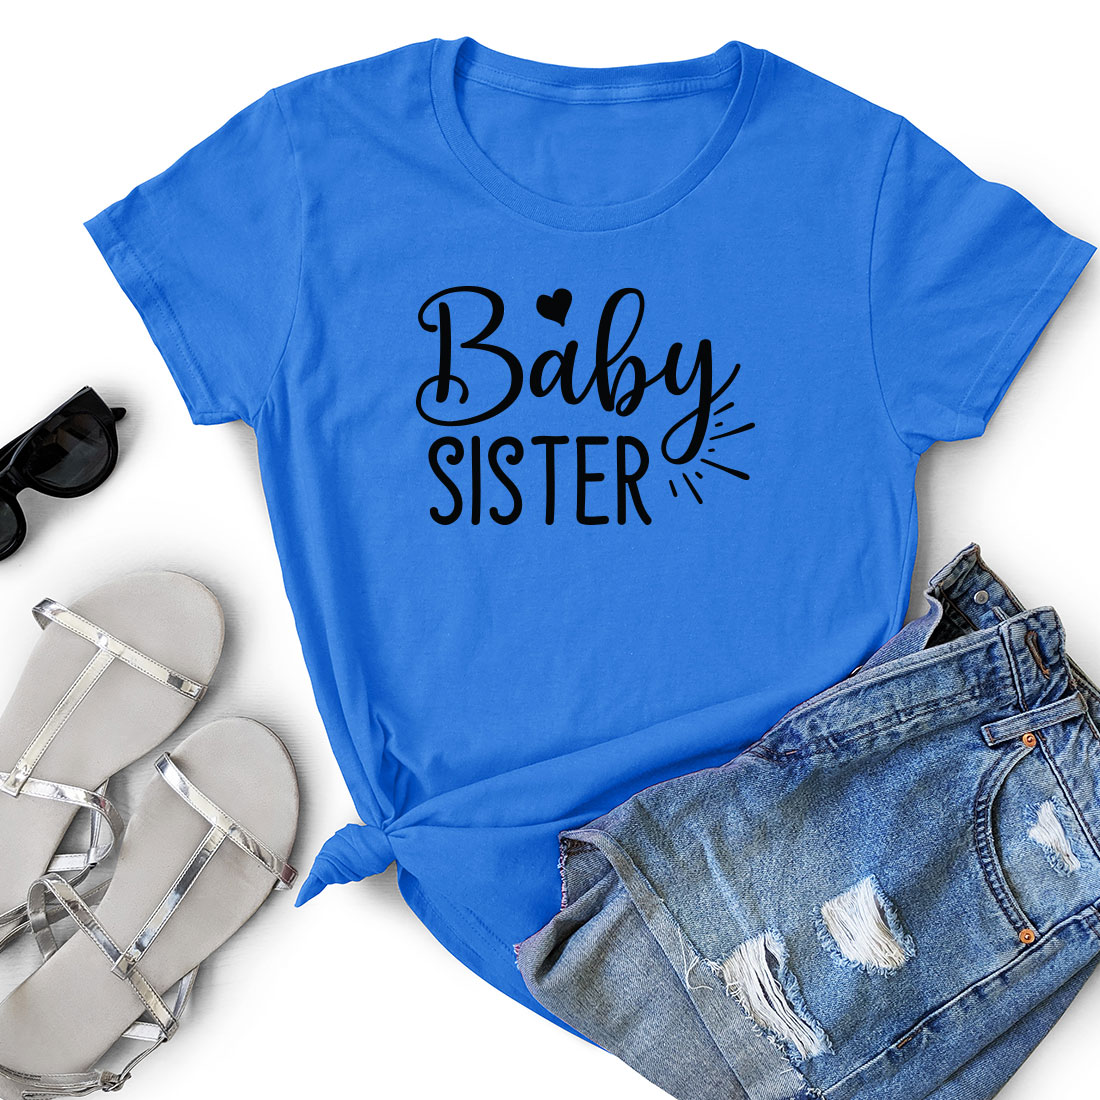 T - shirt that says baby sister next to a pair of shorts.